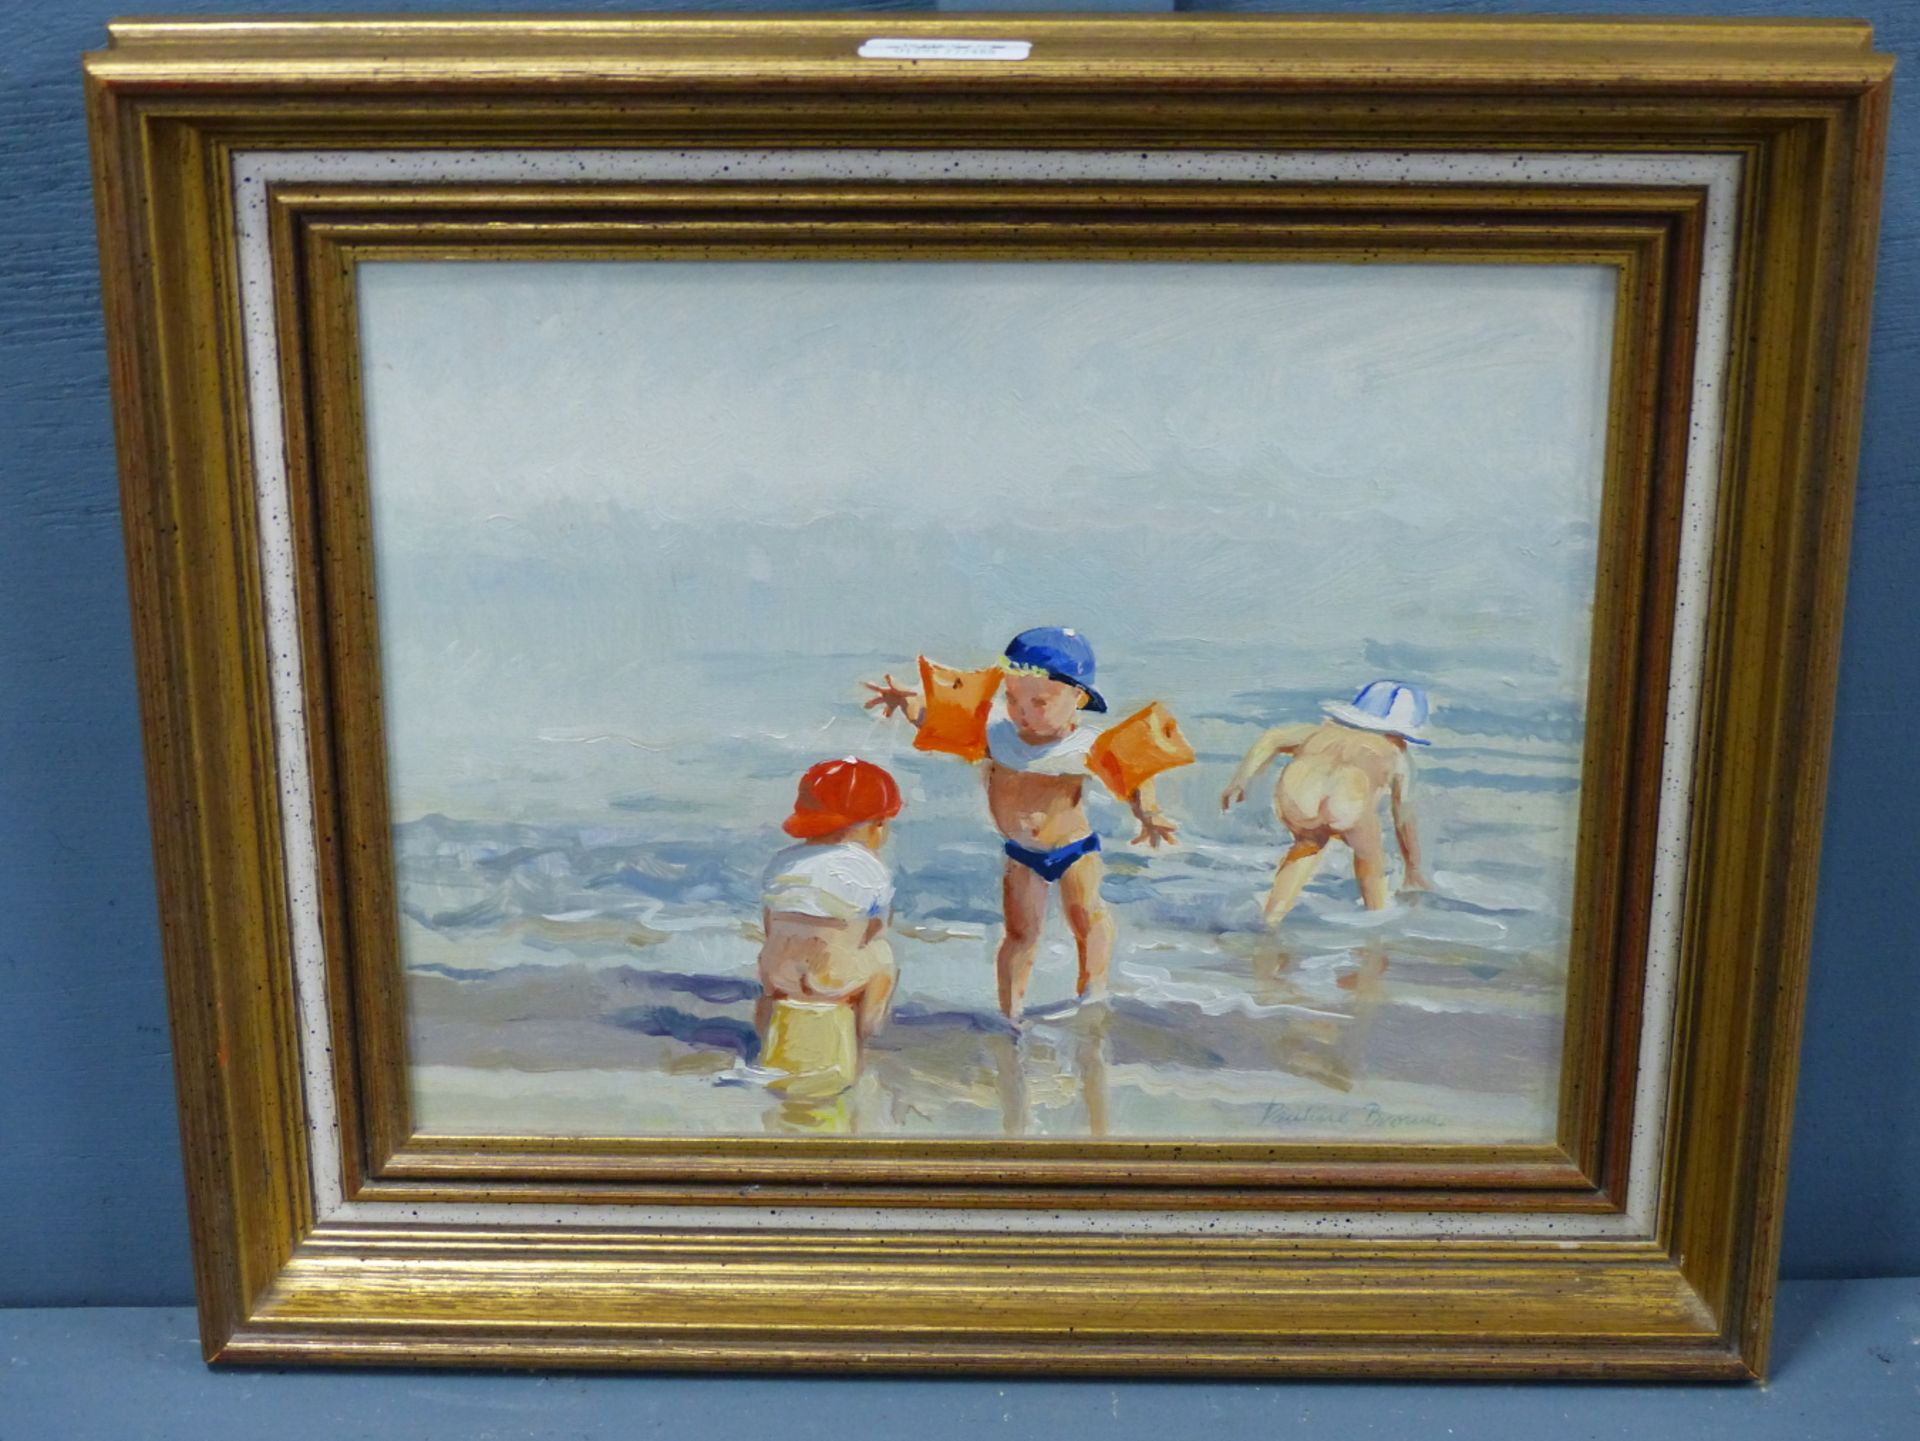 PAULINE BROWN (20TH CENTURY), CHILDREN PLAYING ON A BEACH, SIGNED, OIL ON BOARD, 24 X 19CM, TOGETHER - Image 2 of 12